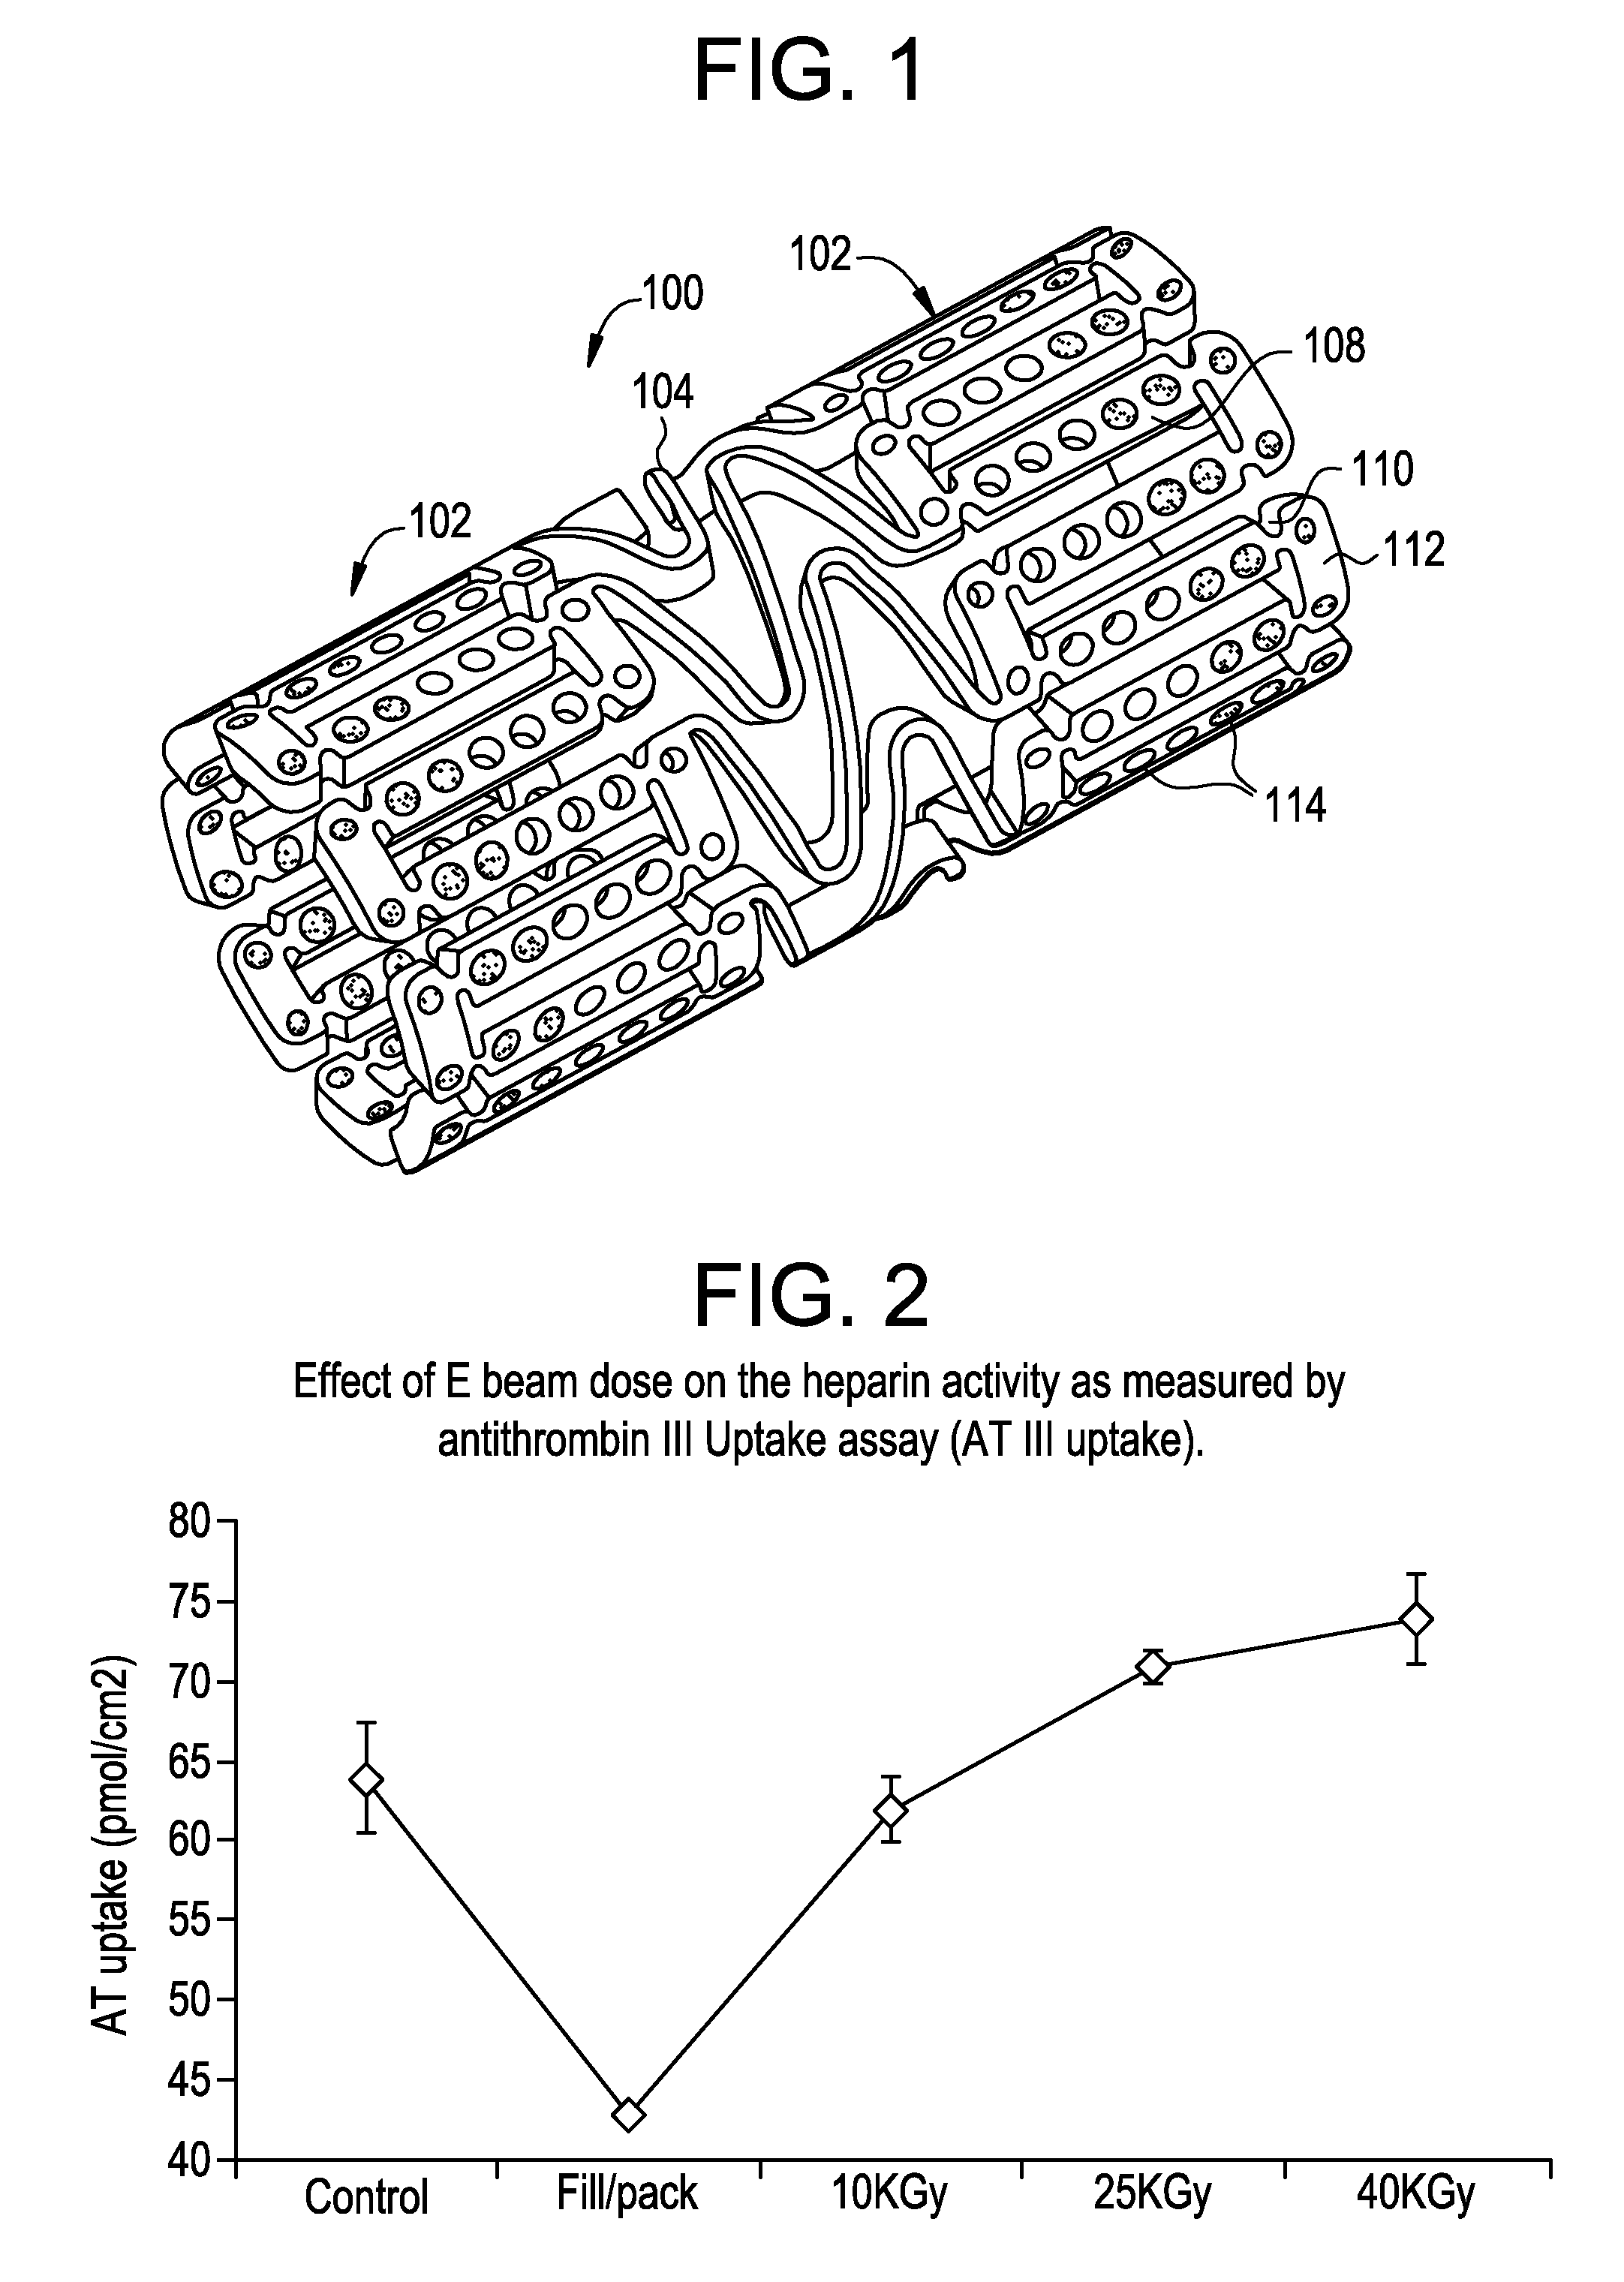 E beam sterilization of medical devices comprising bioactive coating